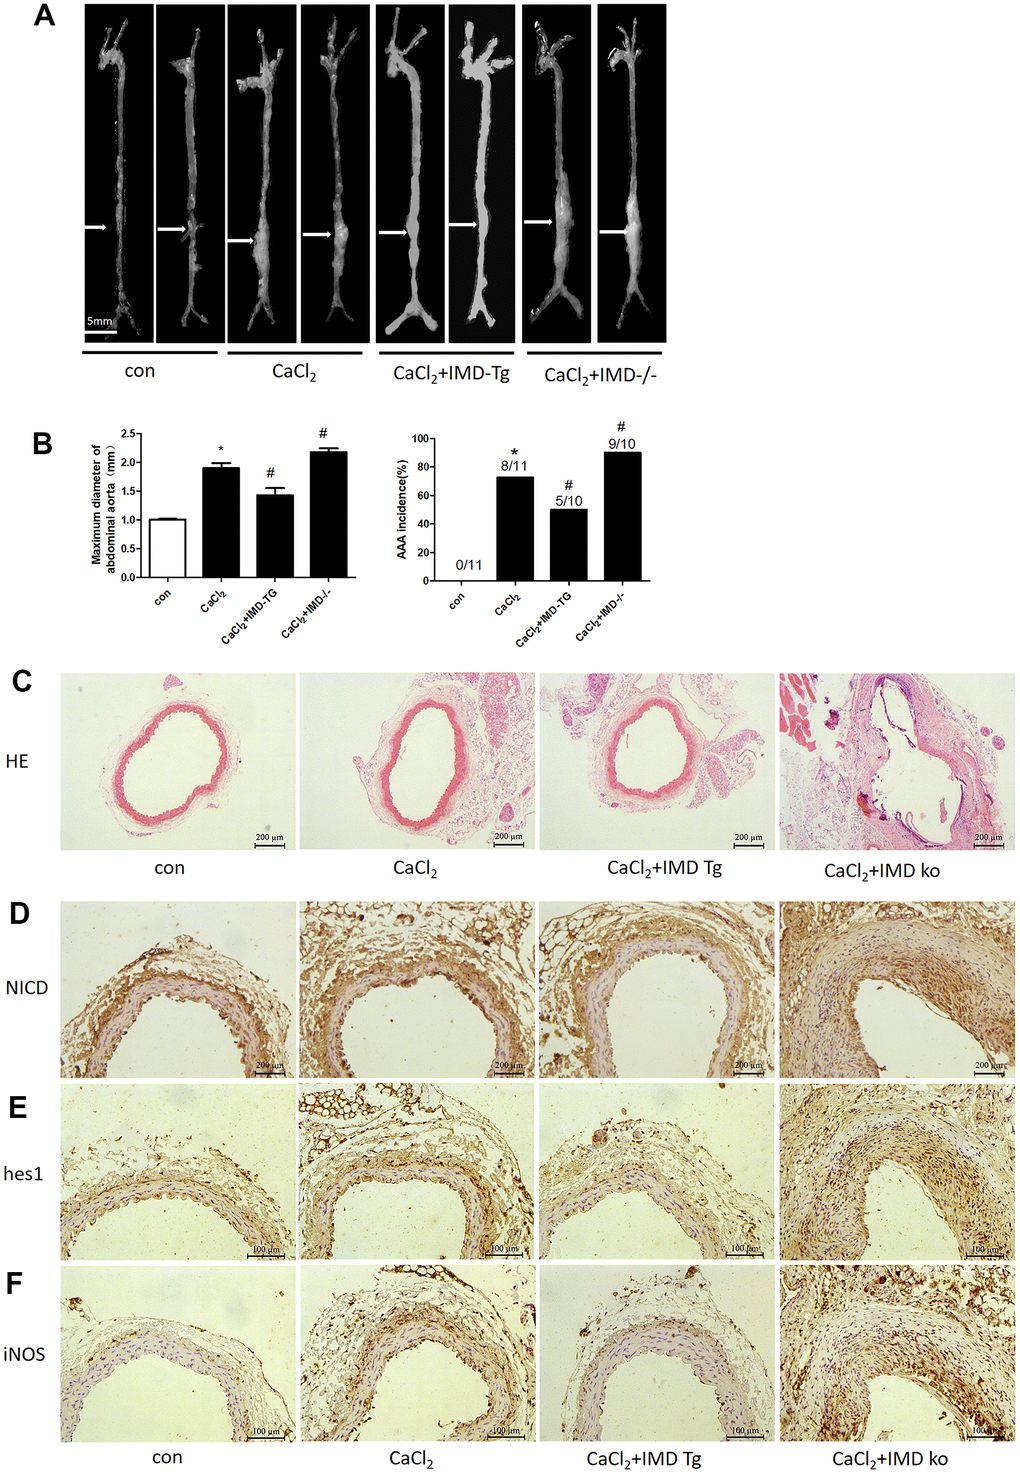 Endogenous IMD alleviated CaCl2-induced AAA and Notch1 signaling and M1 polarization. Control, wild type C57 mice with saline incubation; CaCl2, wild-type C57 mice with CaCl2 incubation; CaCl2+IMD-Tg, IMD transgenic mice with CaCl2 incubation to induce AAA; CaCl2+IMD ko, IMD-knockout mice with CaCl2 incubation to induce AAA. (A) Representative photographs of macroscopic features of aneurysms in male C57 mice at the end of 28 days. Scale bar, 5 mm. (B) Incidence of CaCl2-induced AAA in animals and maximal abdominal aortic diameter of surviving mice at the end of 28 days. The vascular diameter > 50% of the average diameter of the control group was considered AAA. *P#P2. (C) Representative HE staining. Scale bar, 200 μm. (D–F) Immunohistochemistry of the protein expression of NICD, hes1 and iNOS in aortas of mice.